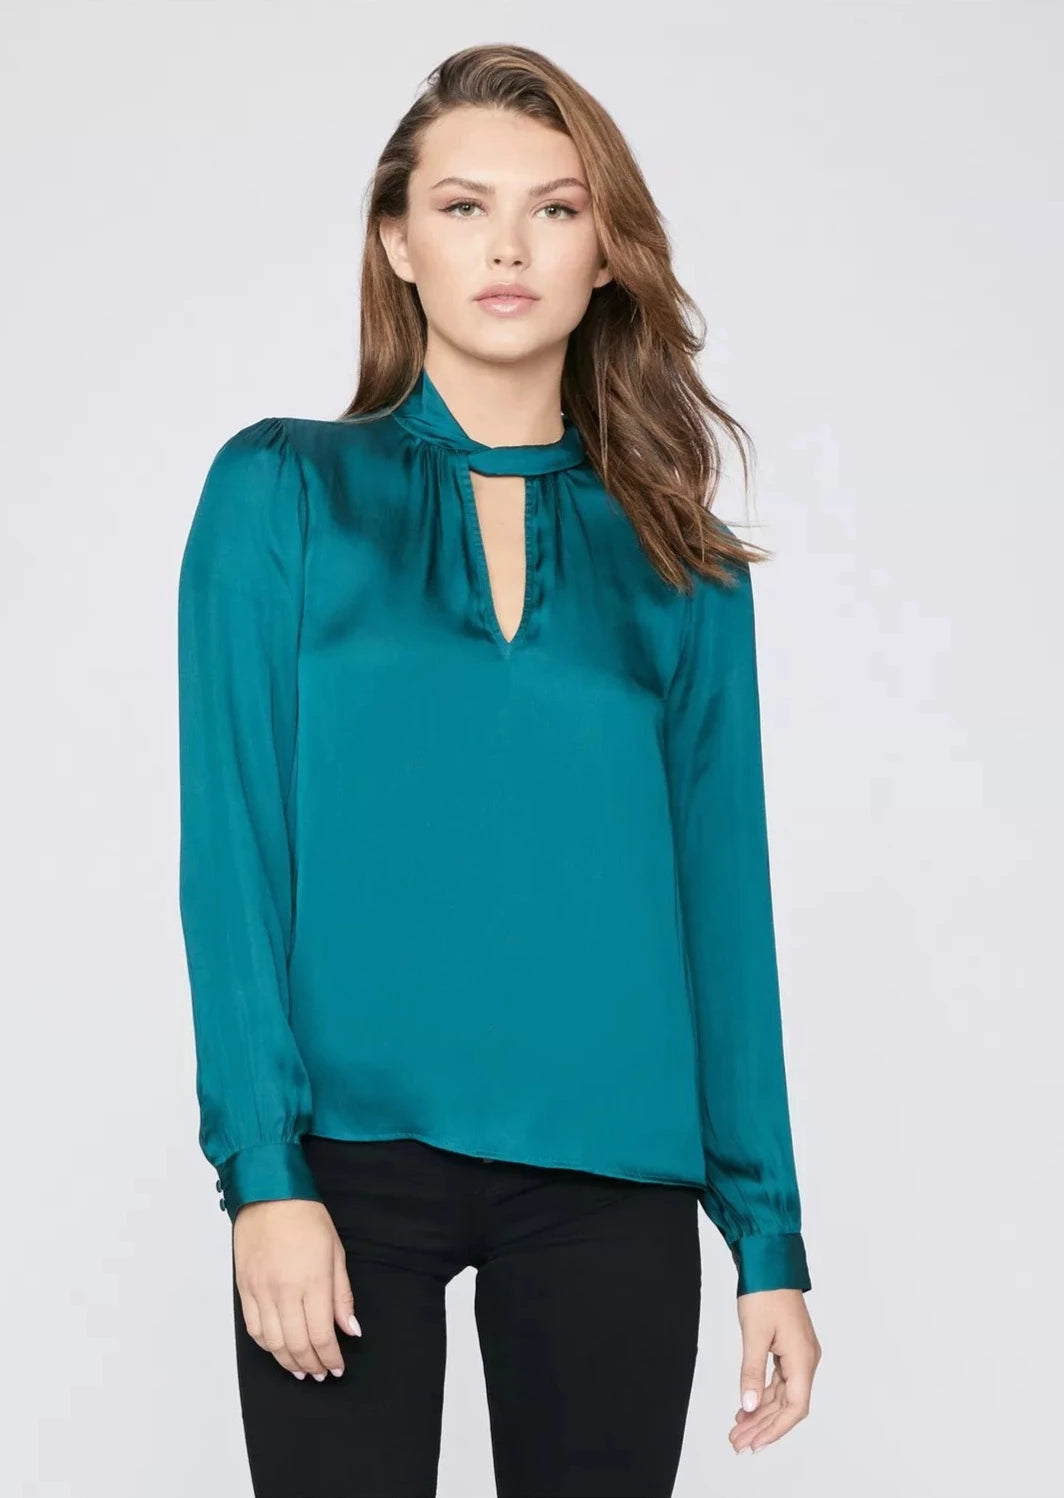 Paige Ceres Notch L/S with Neck Twist in Midnight Cyan